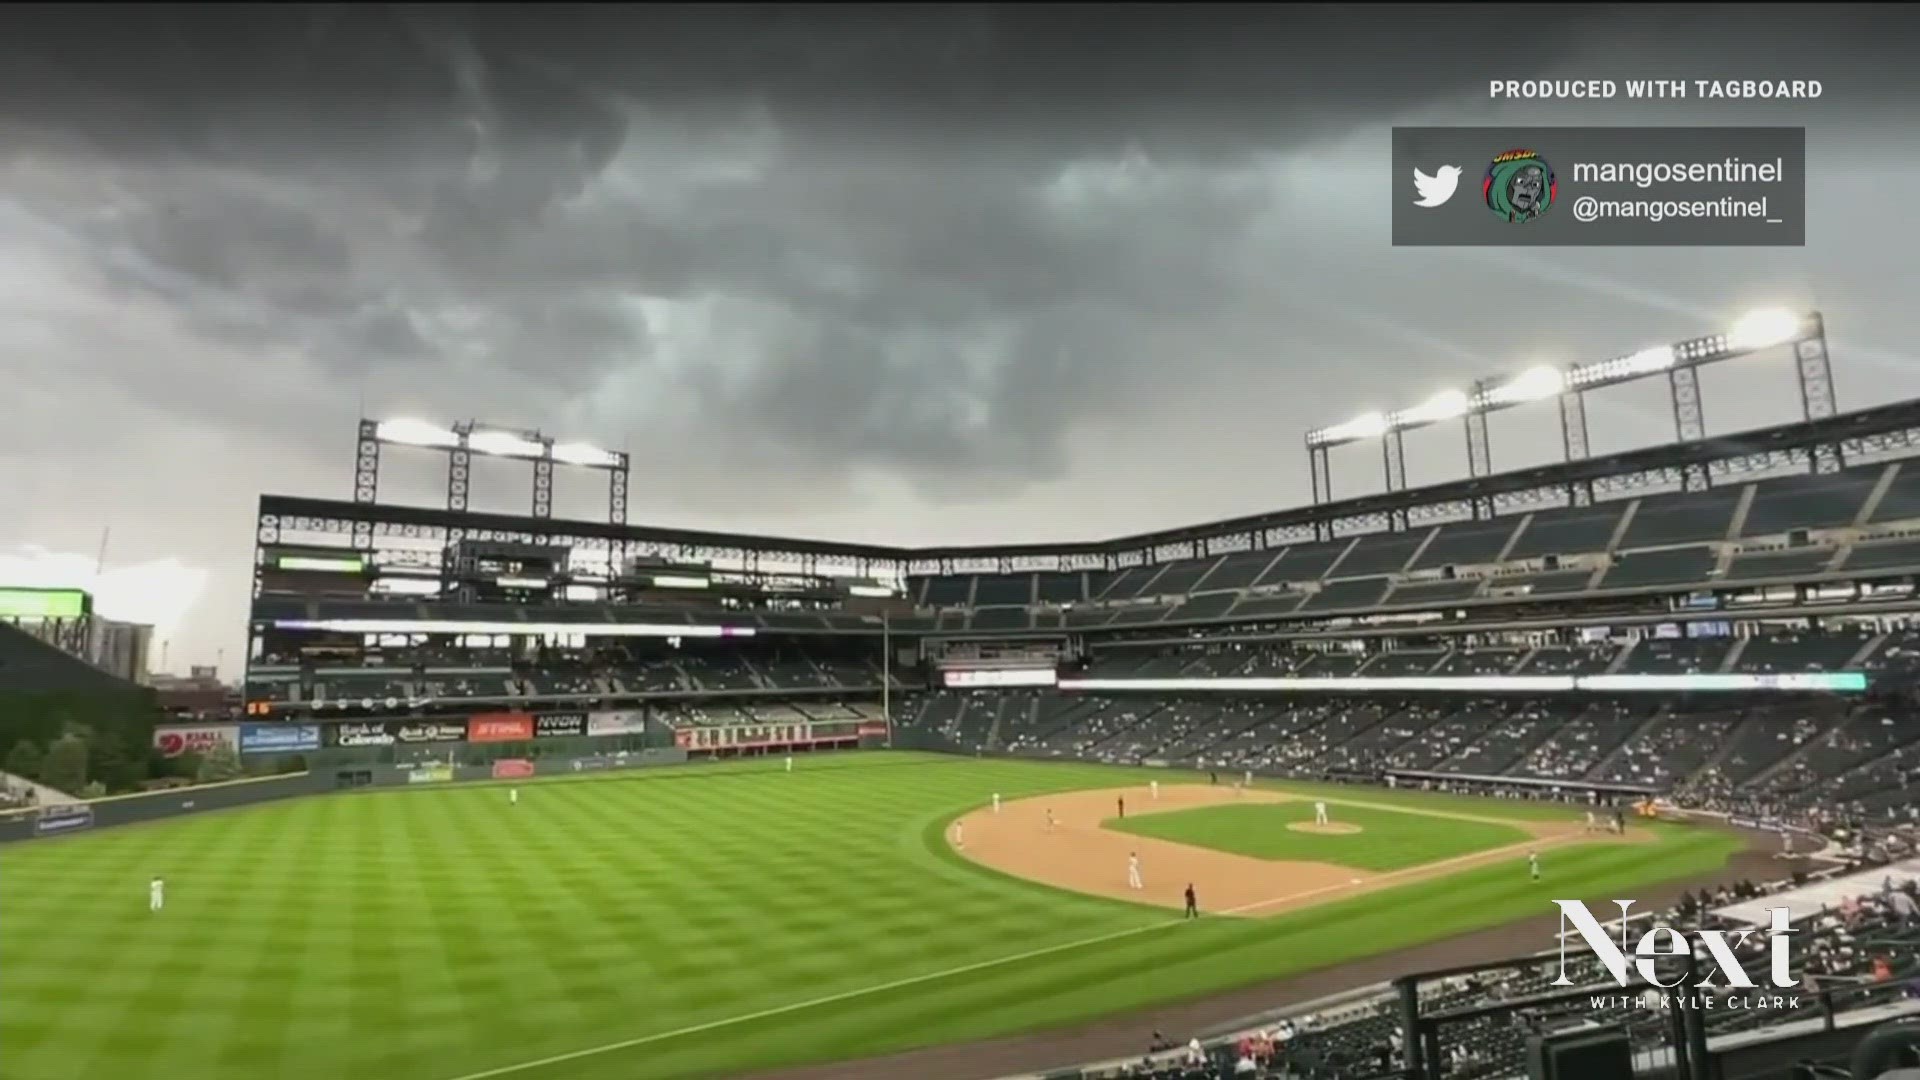 Between 2016 and 2019, there were 49 Rockies home games where there was a lightning strike within 8 miles of Coors. Today they came within two miles - with no delay.